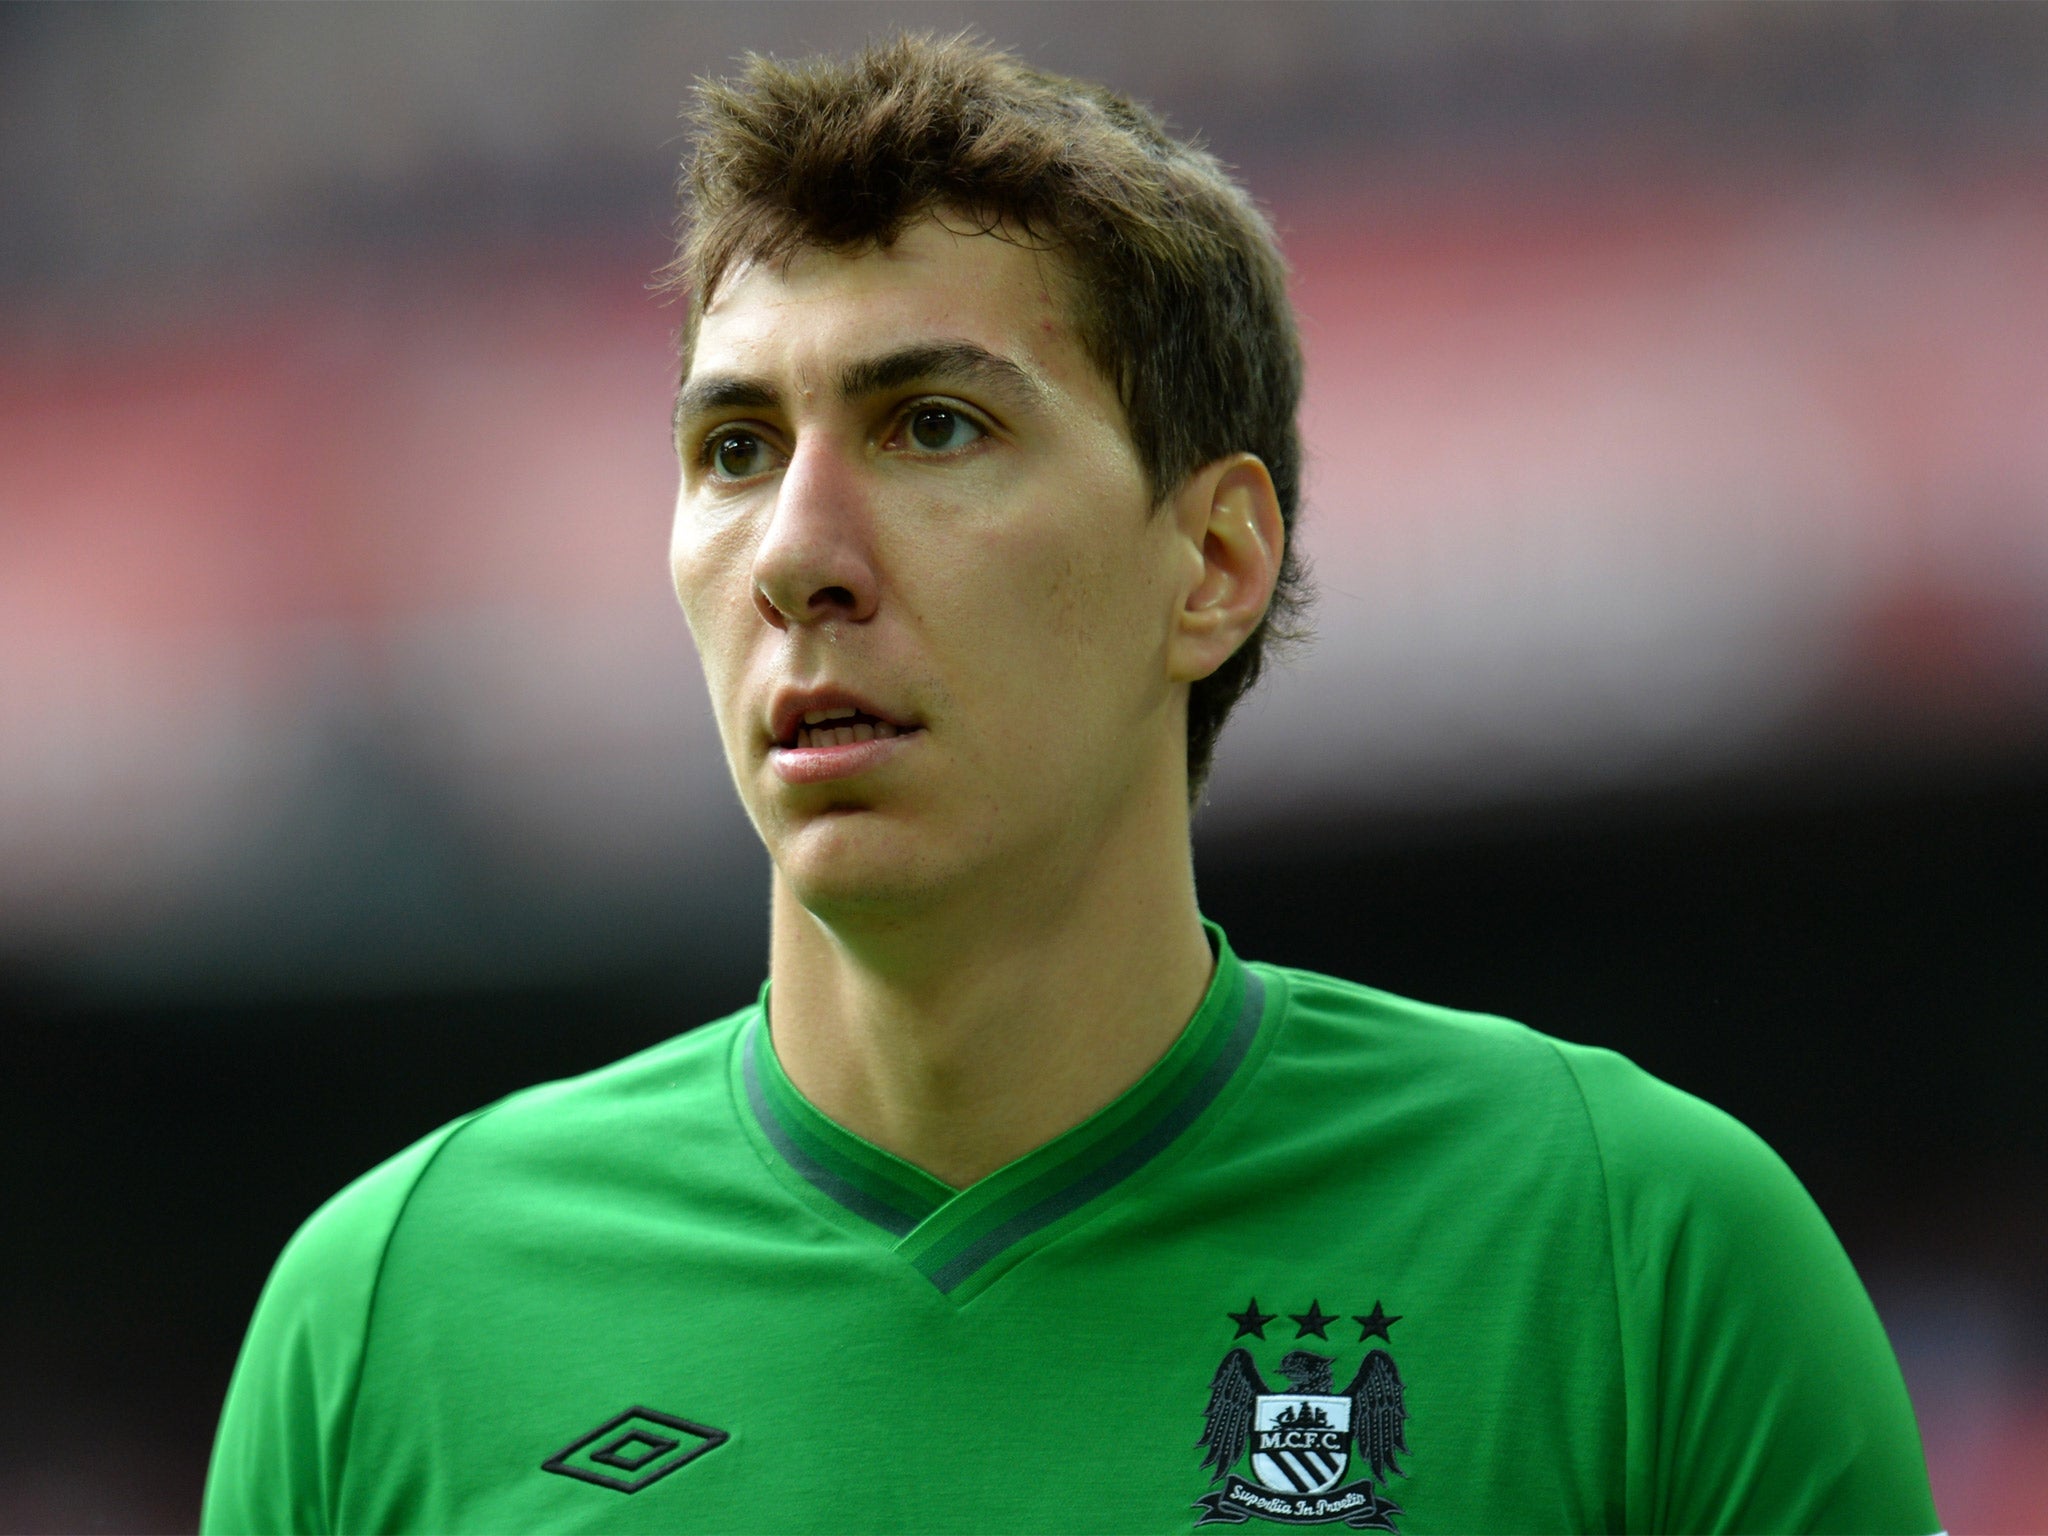 Costel Pantilimon wants to find a regular role as No 1 keeper away from City